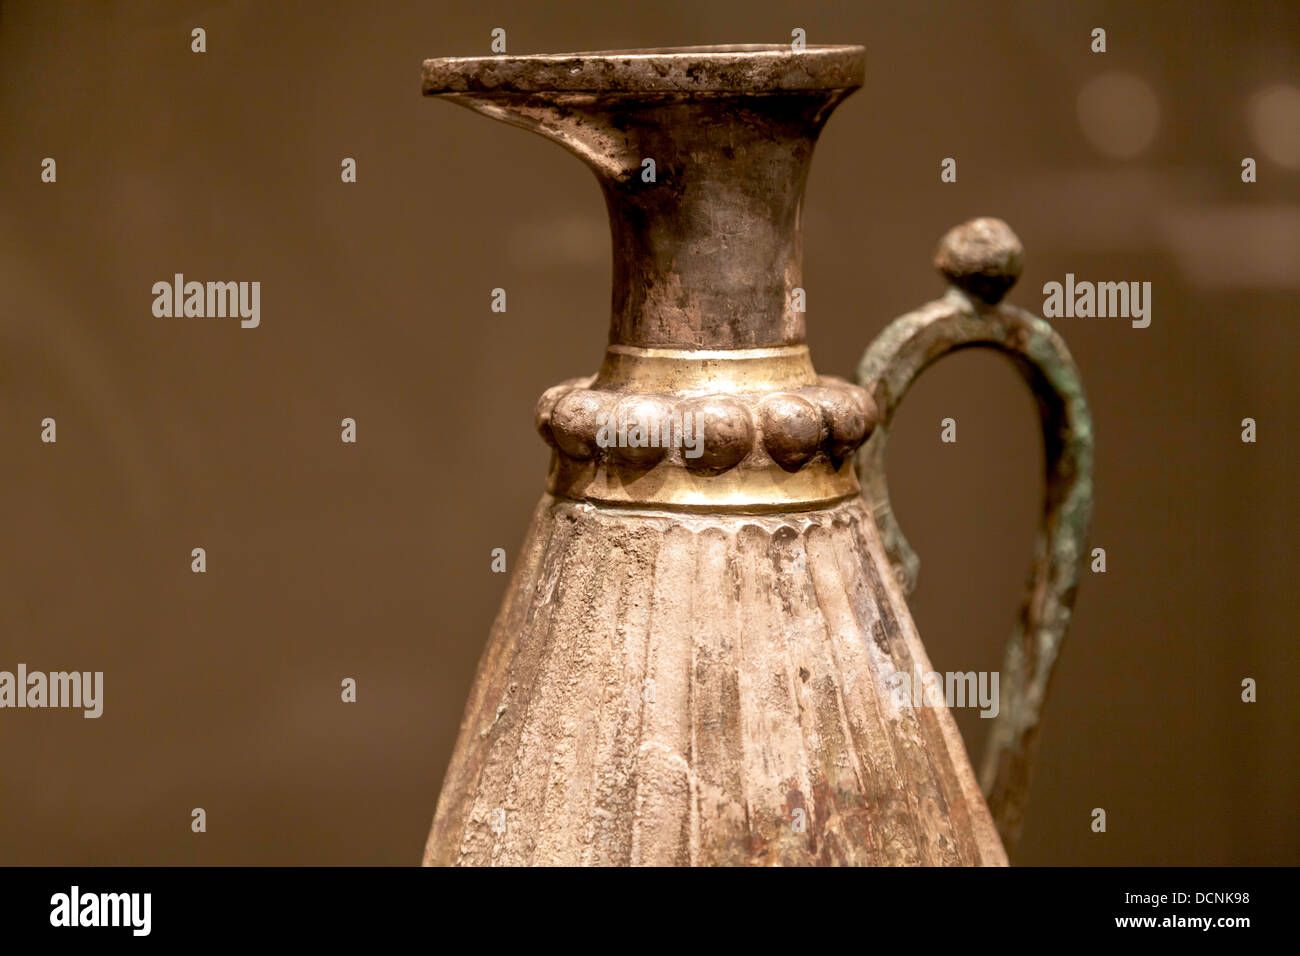 Iranian silver and gilt fluted ewer, Sasanian period 6th-7th century CE. Stock Photo